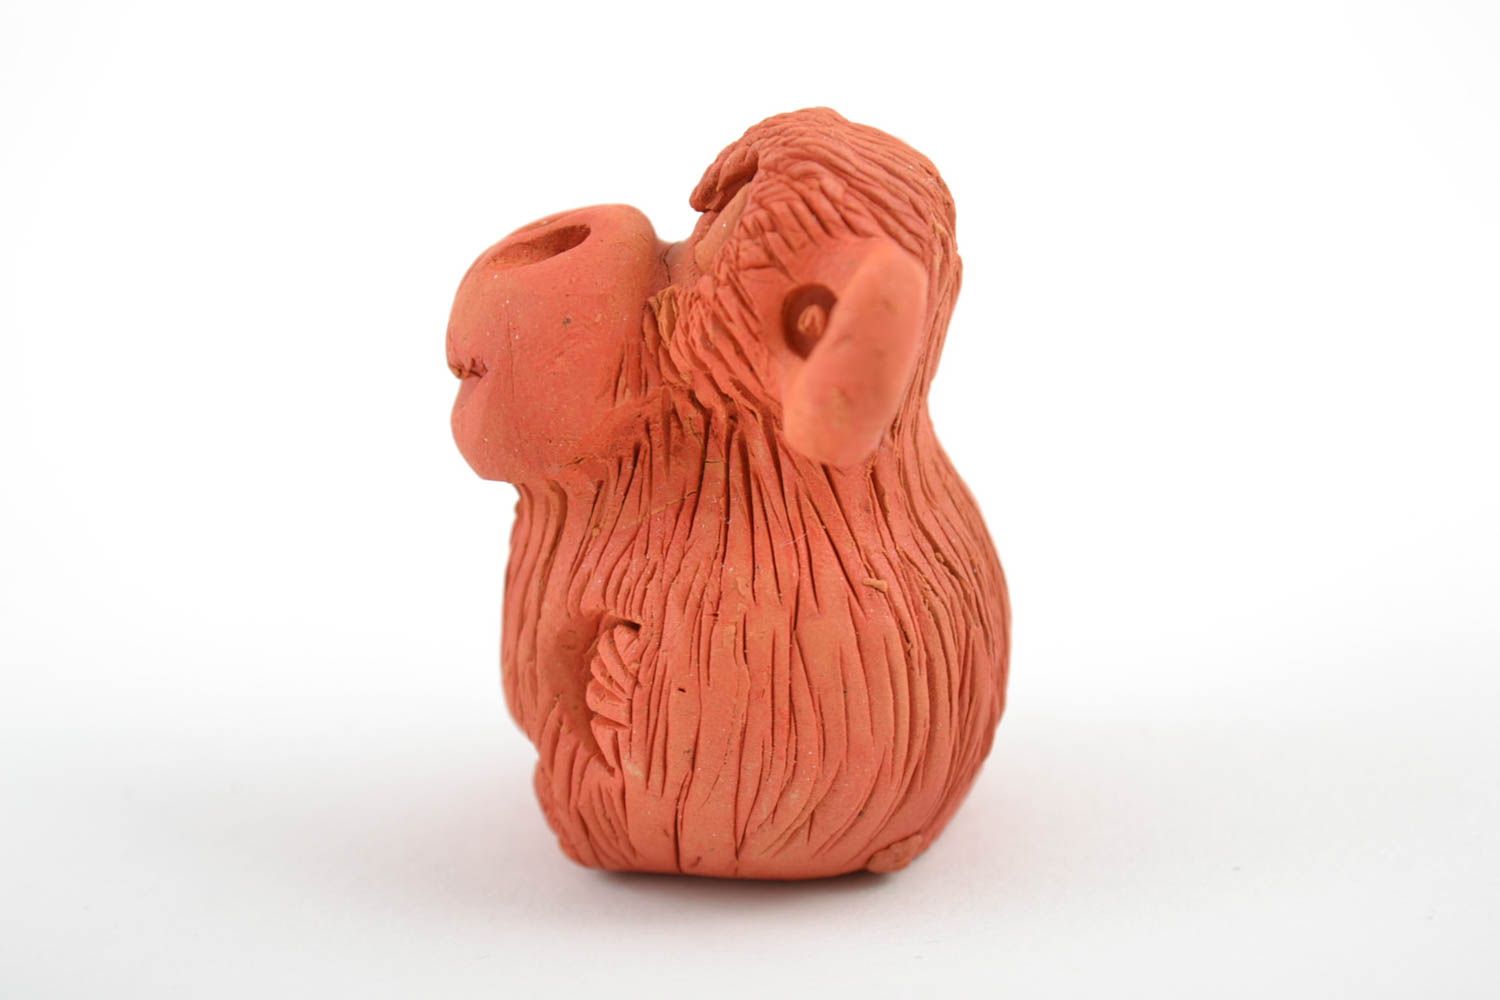 Ceramic statuette of monkey made of red clay handmade decorative home figurine photo 3